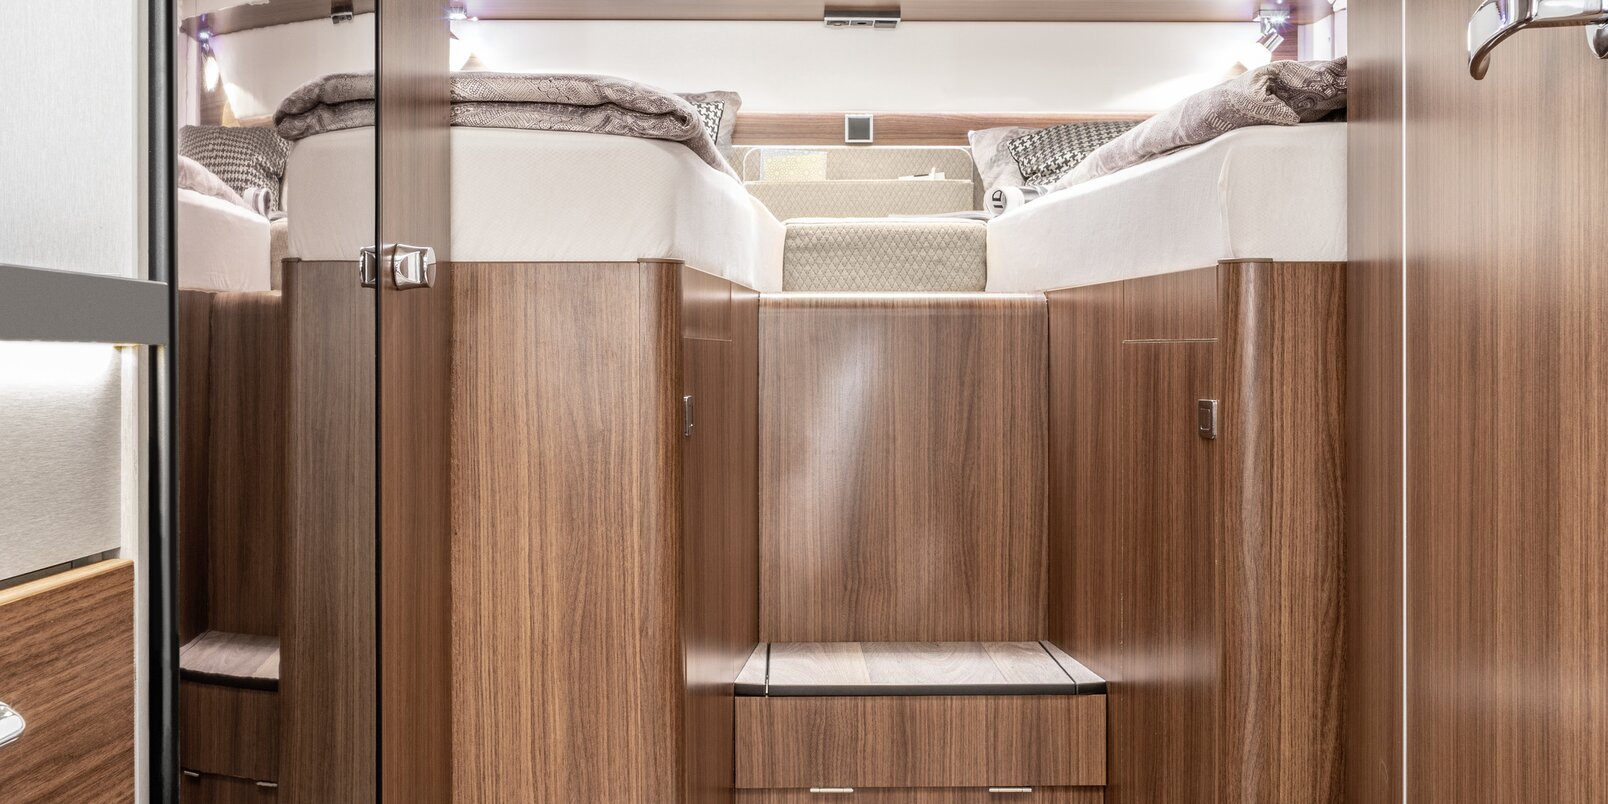 Living space storage compartment in the double floor of the HYMER B-MC SLC chassis for accommodating water tanks and other installations